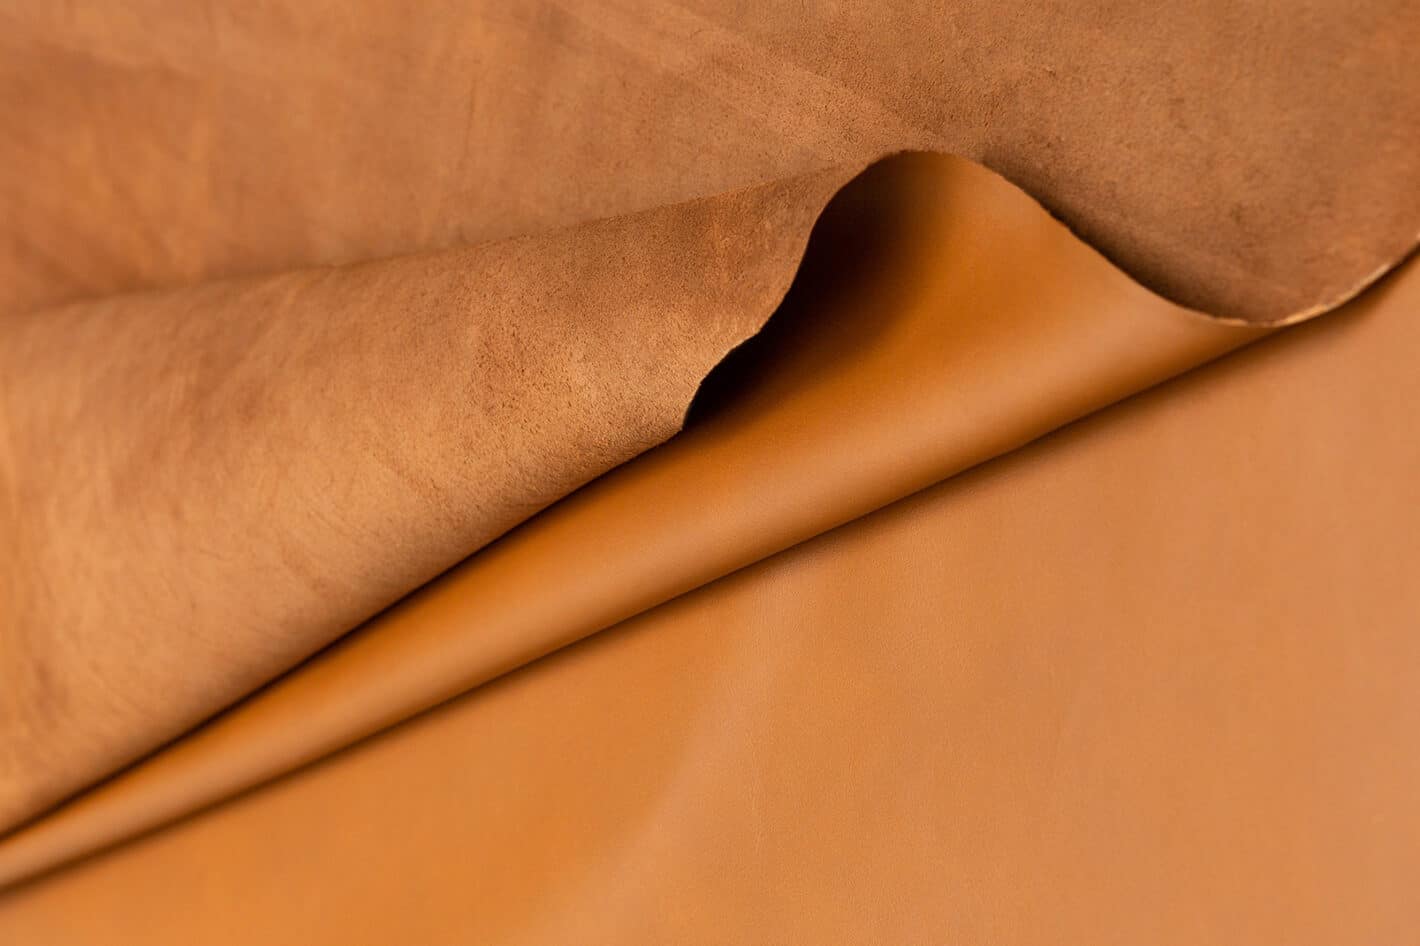 Muirhead Active Hygiene Leather is a sustainable natural leather with built-in antimicrobial technology designed to improve the hygiene of aircraft cabins.